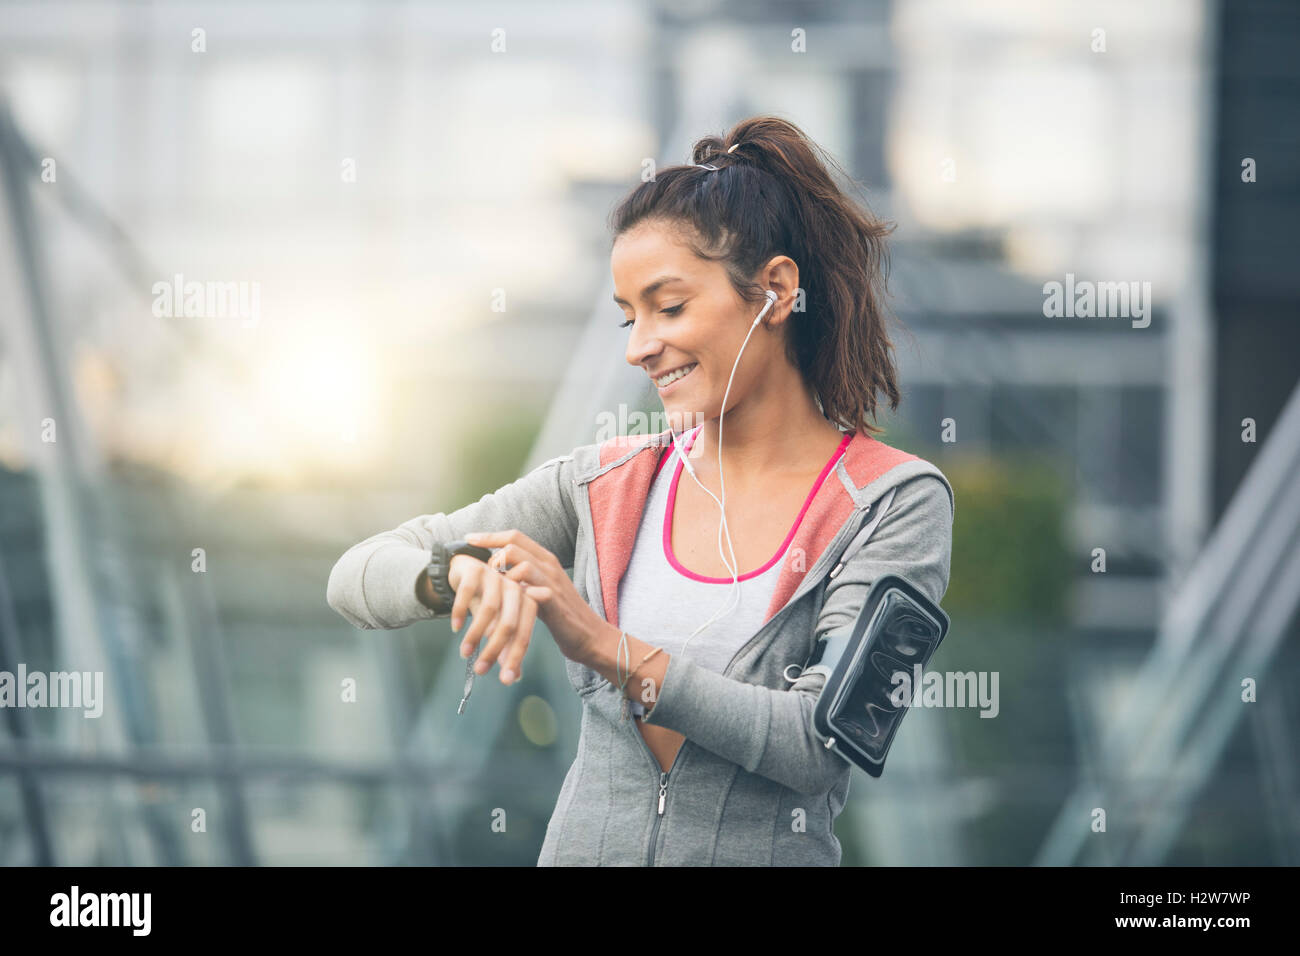 Female runner looking at her sport watch. Measuring heart rate Stock Photo